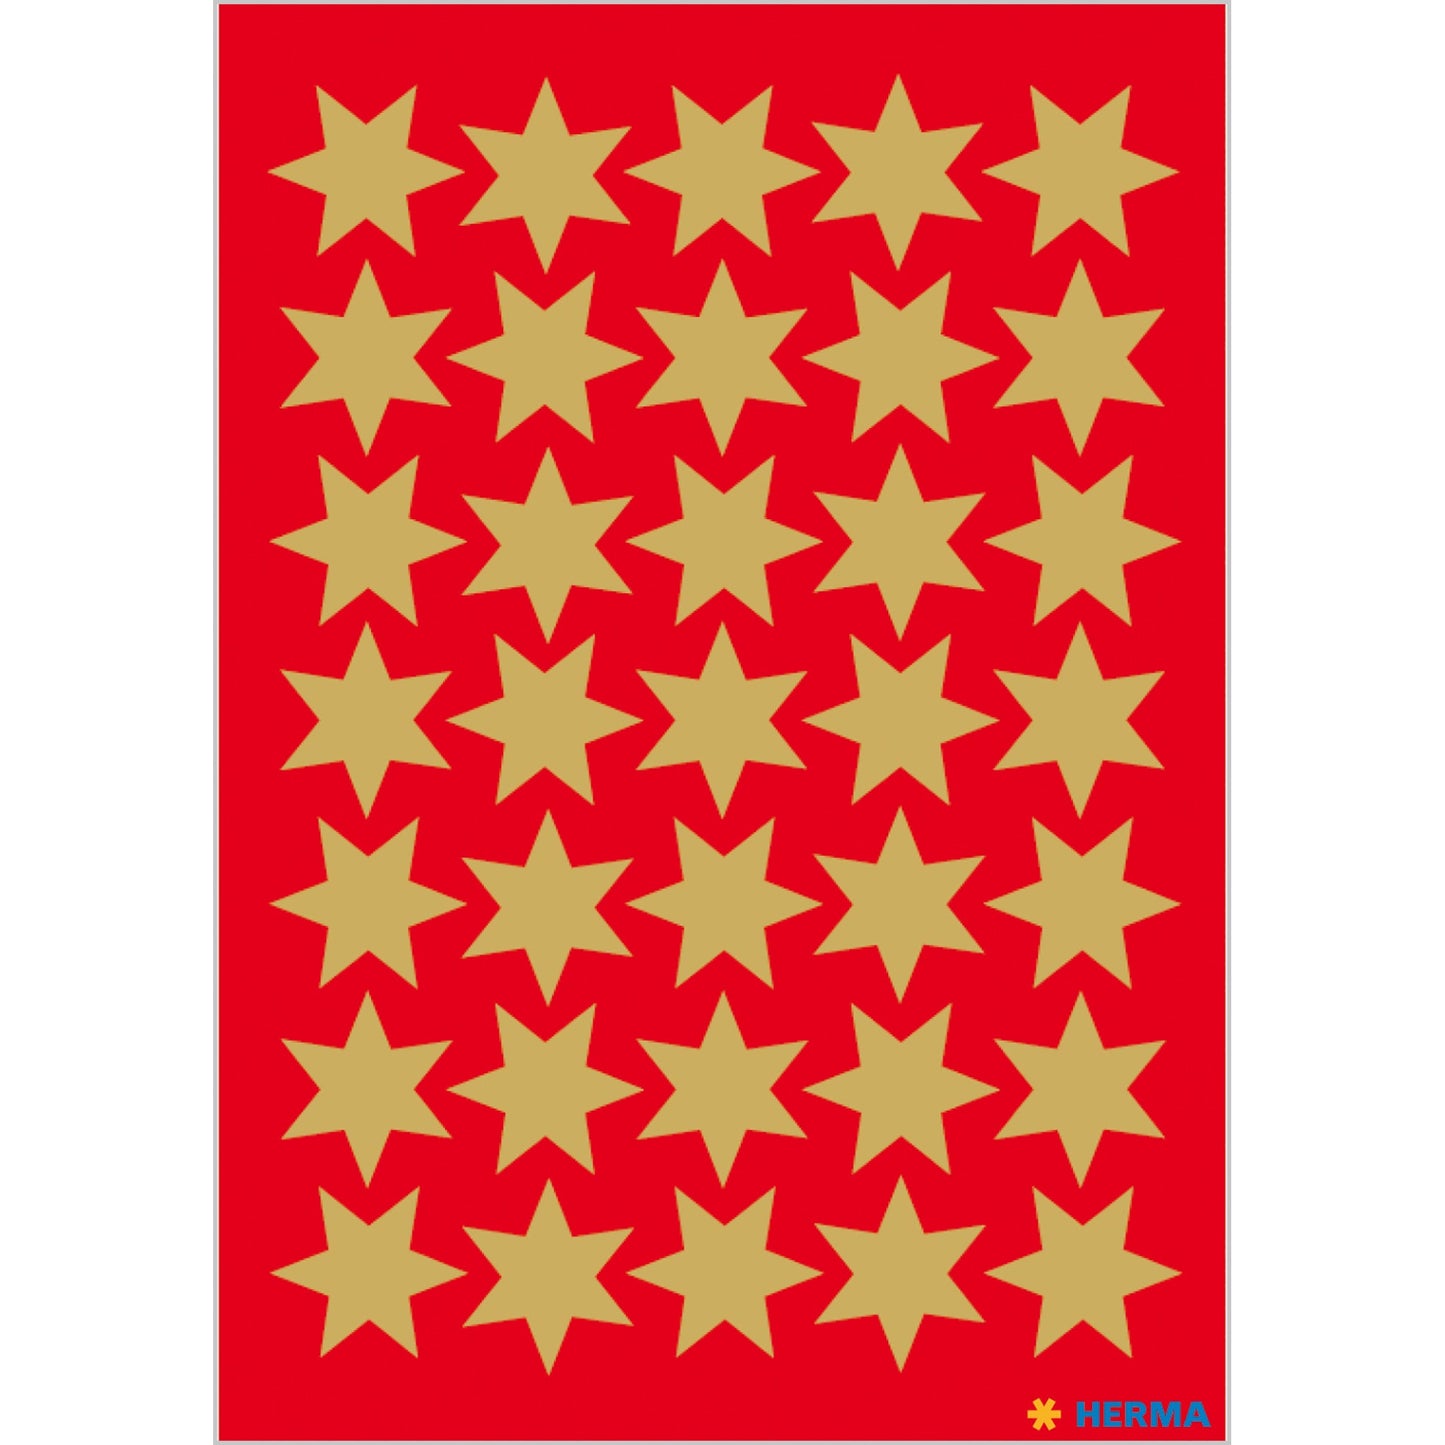 Stickers stars 6-pointed, Gold Ø 16 mm (3904)